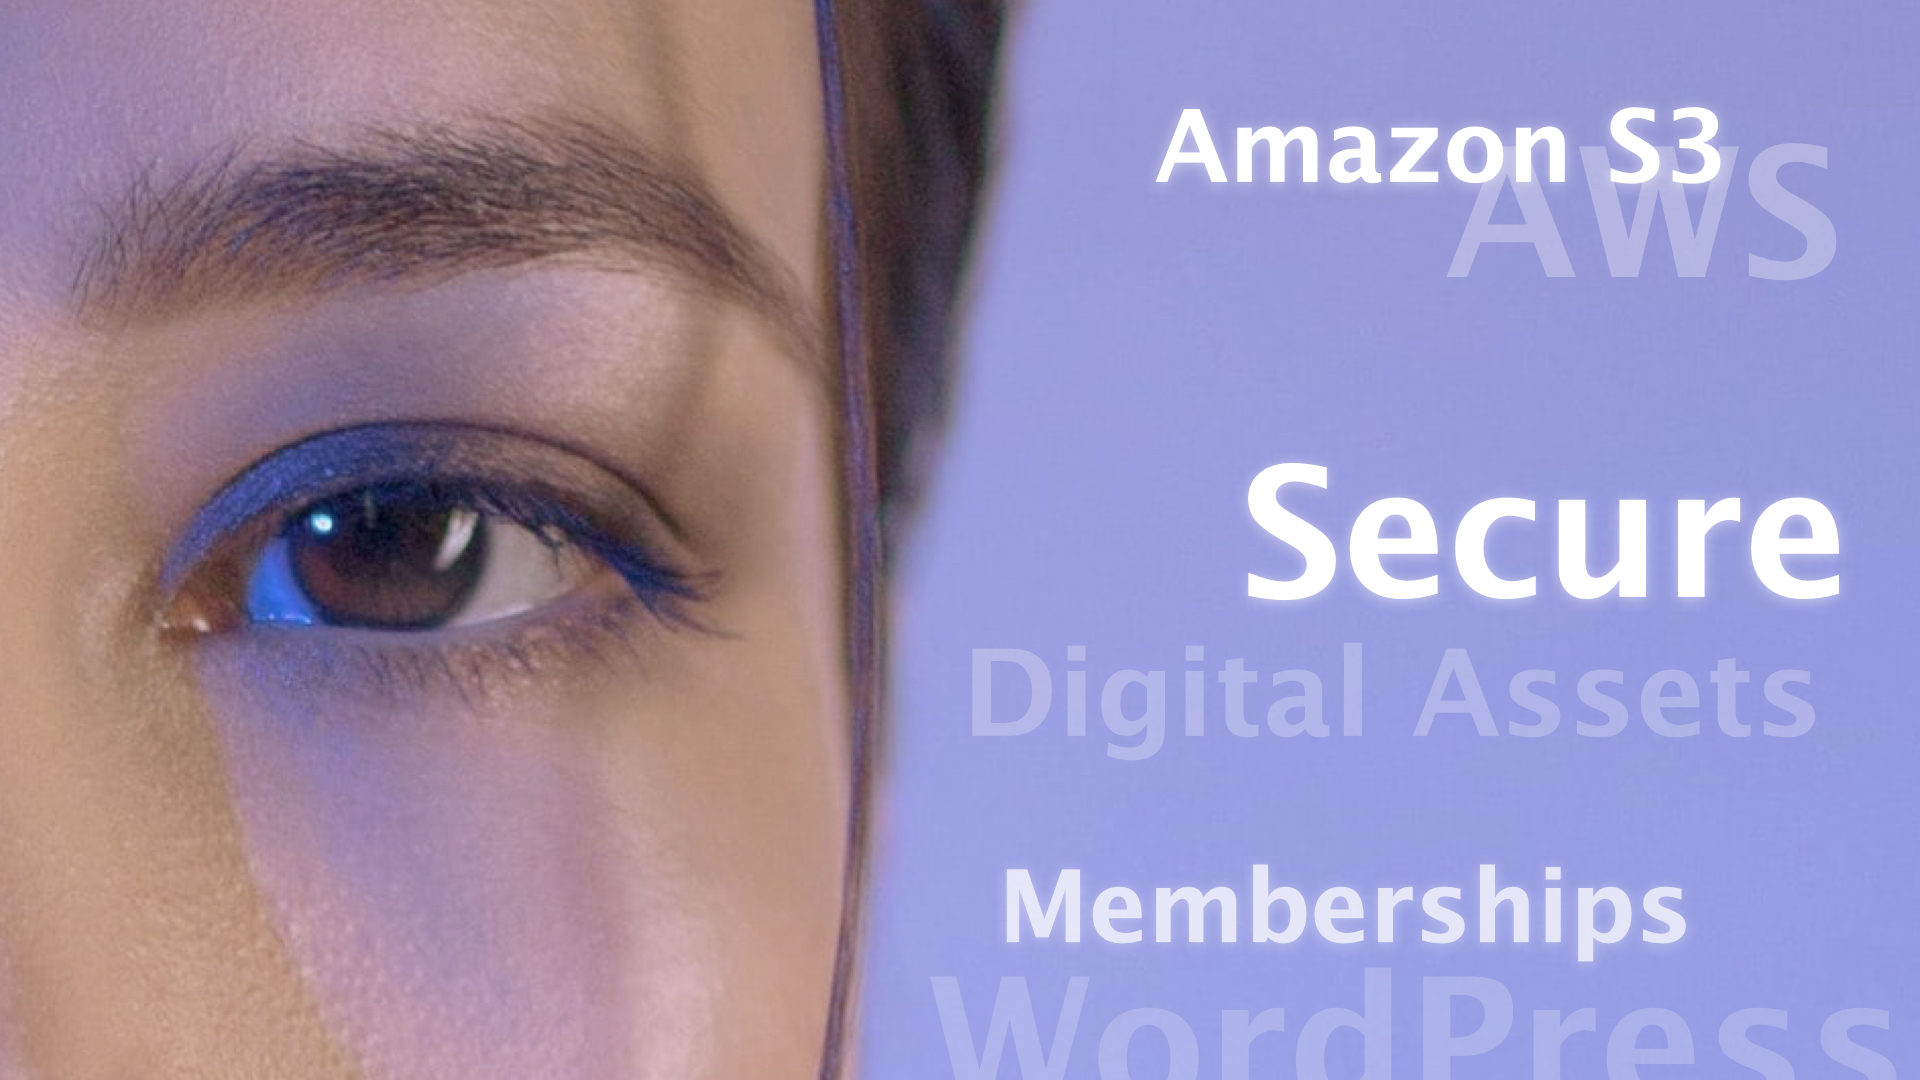 Looking at Amazon S3, AWS as a storage for secure digital assets provided via Memberships on WordPress